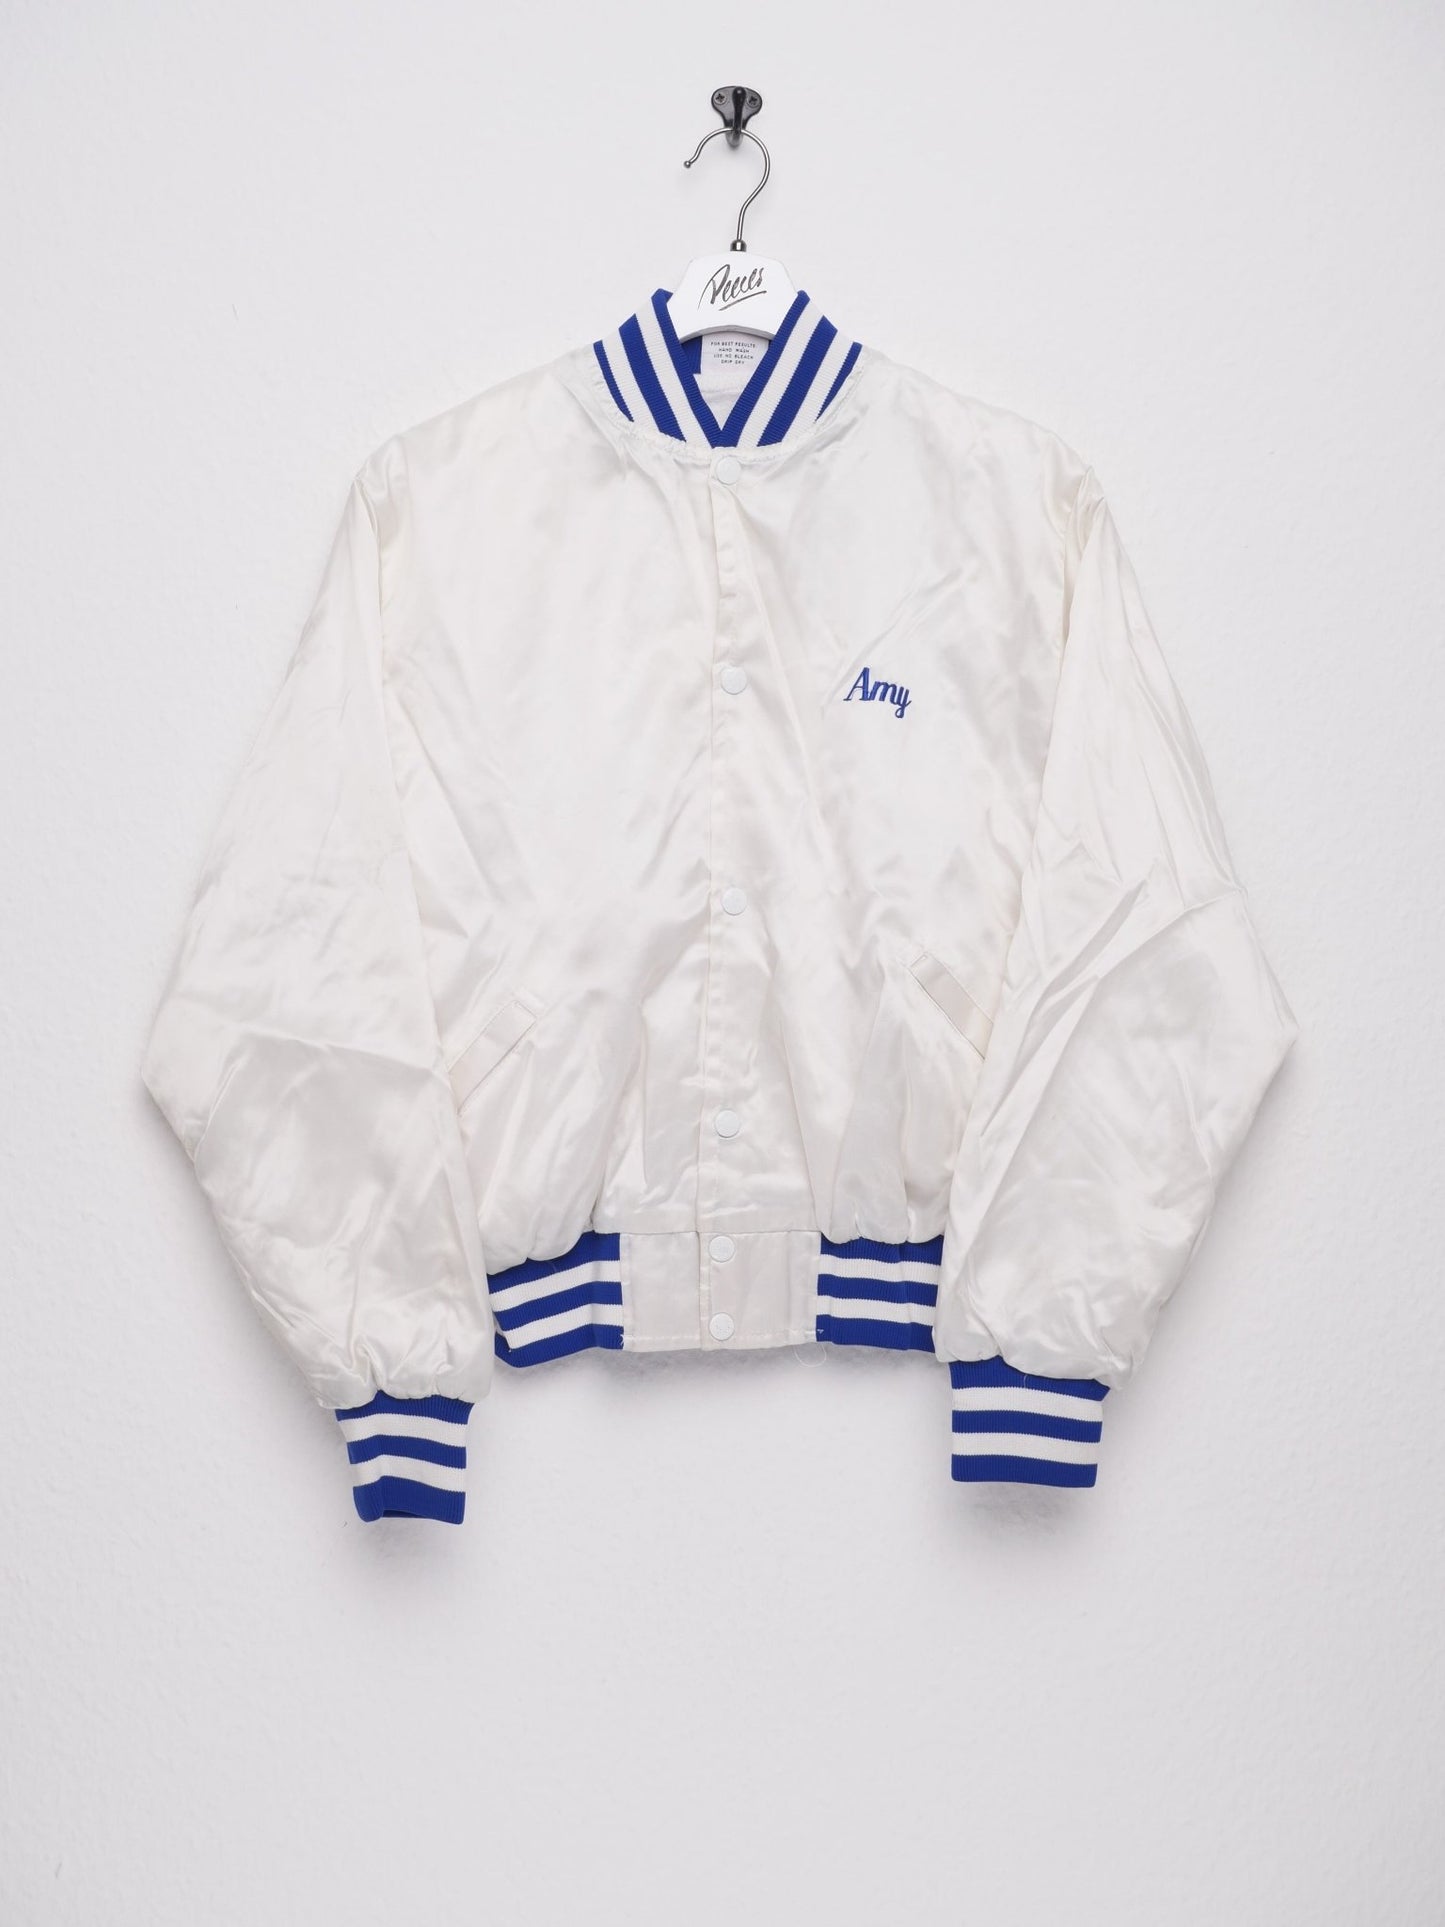 Amy embroidered Spellout white College Jacke - Peeces